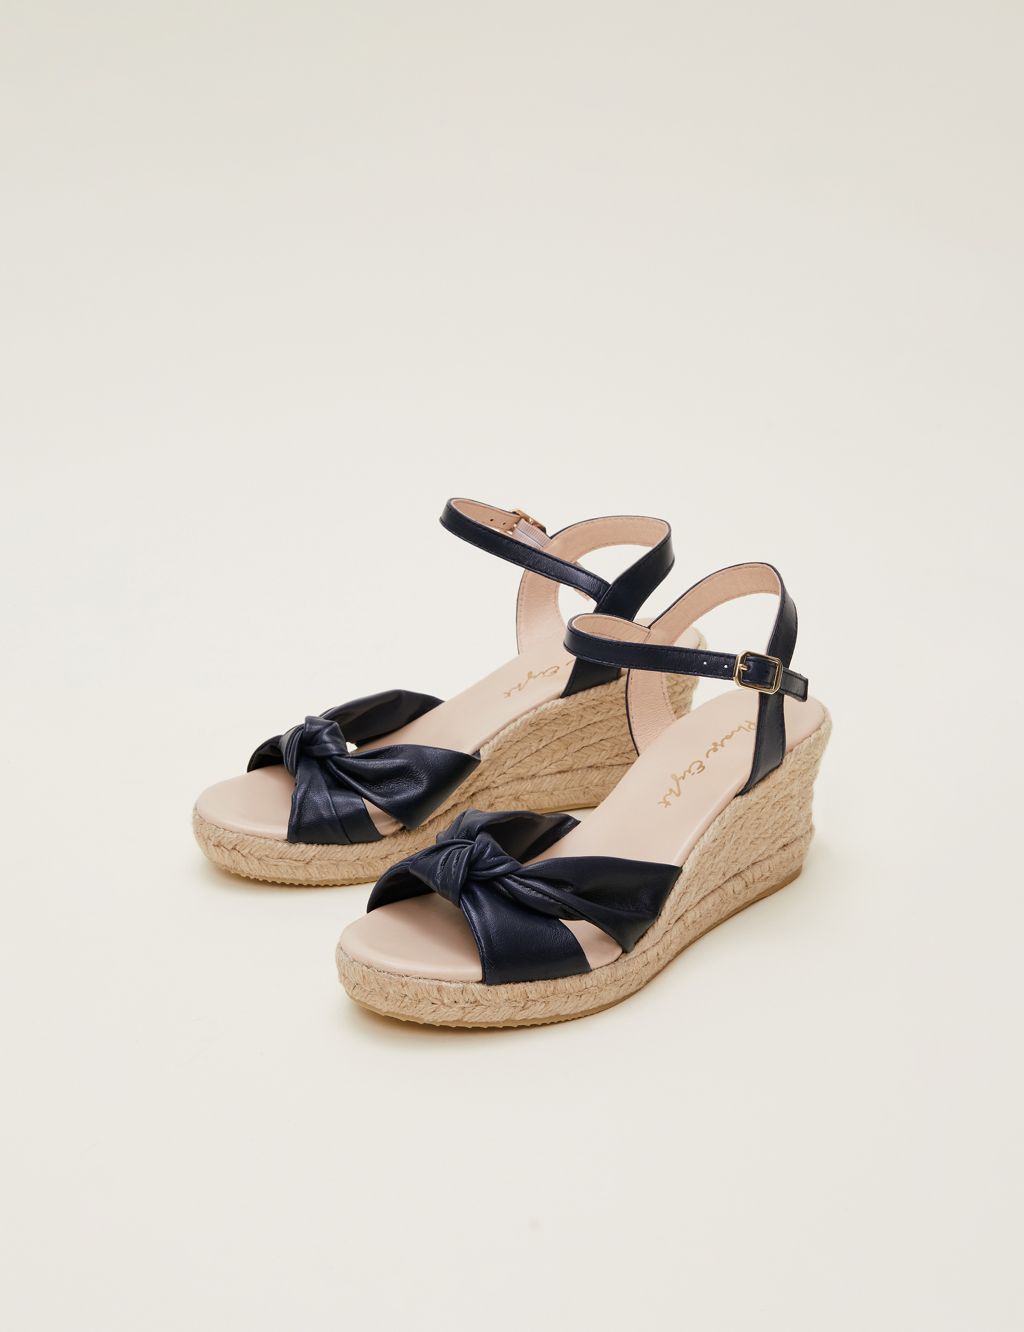 Leather Knot Ankle Strap Wedge Espadrilles image 3